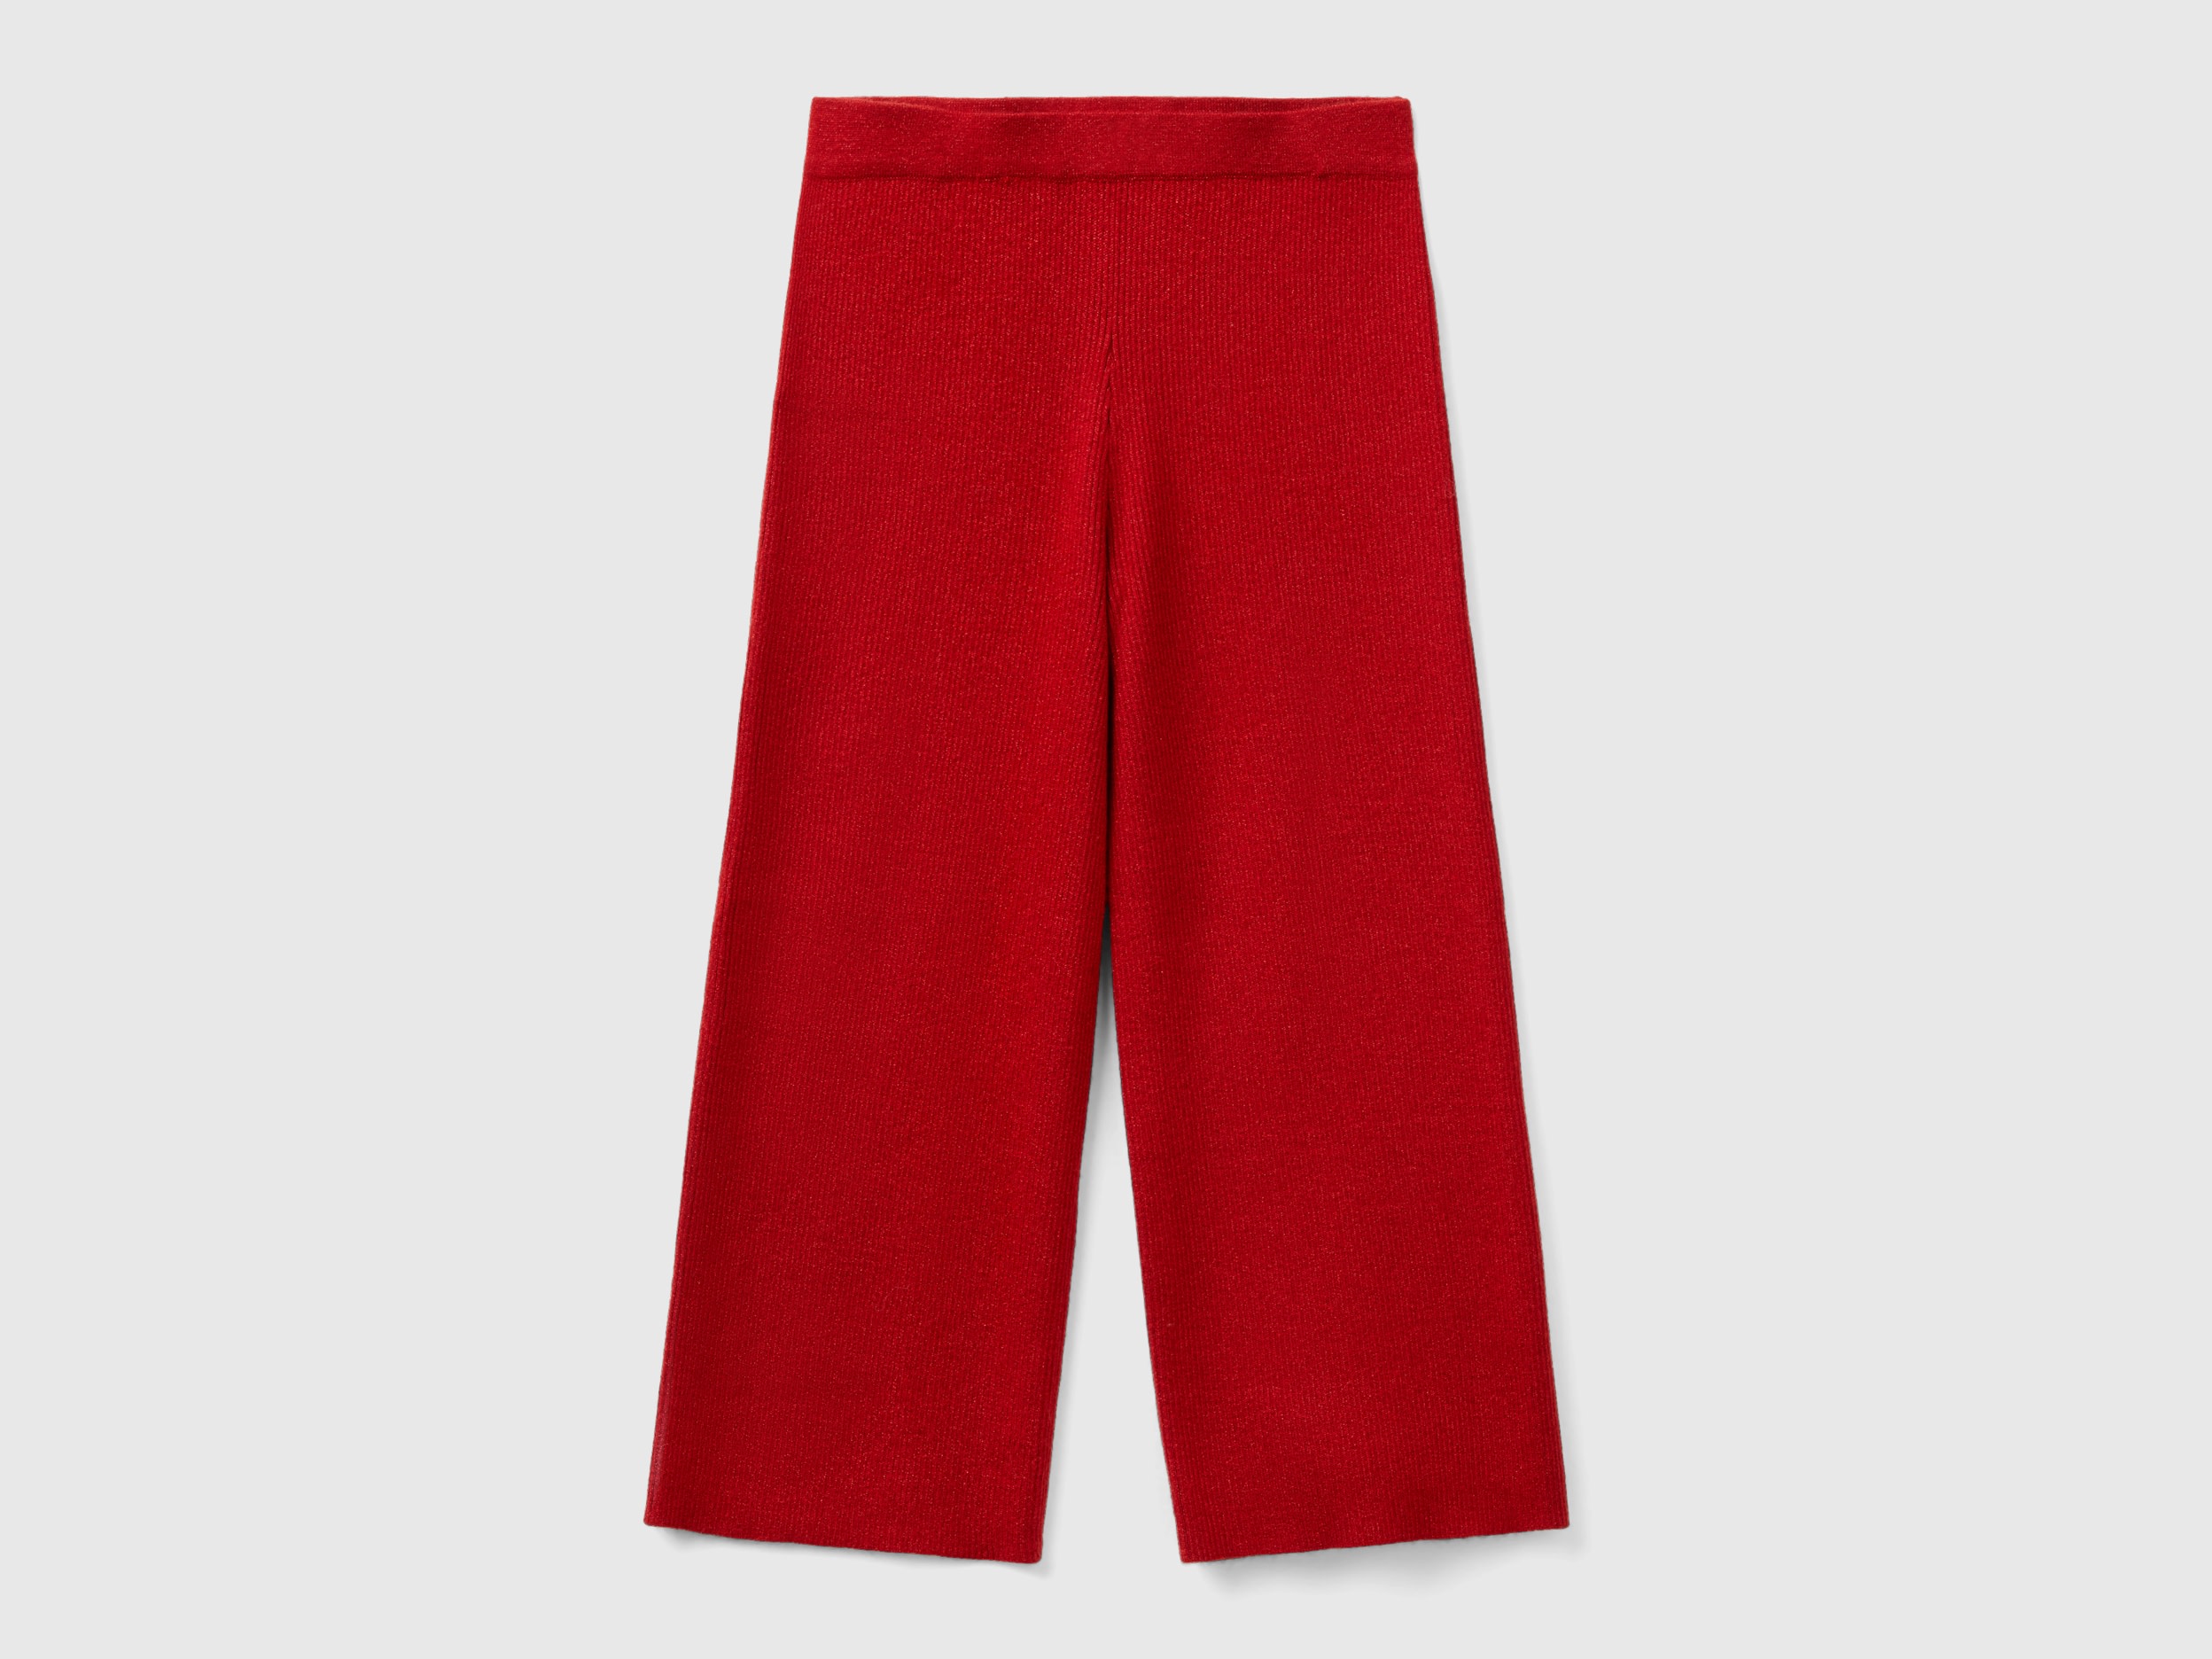 Benetton, Knit Pants With Lurex, size L, Red, Kids